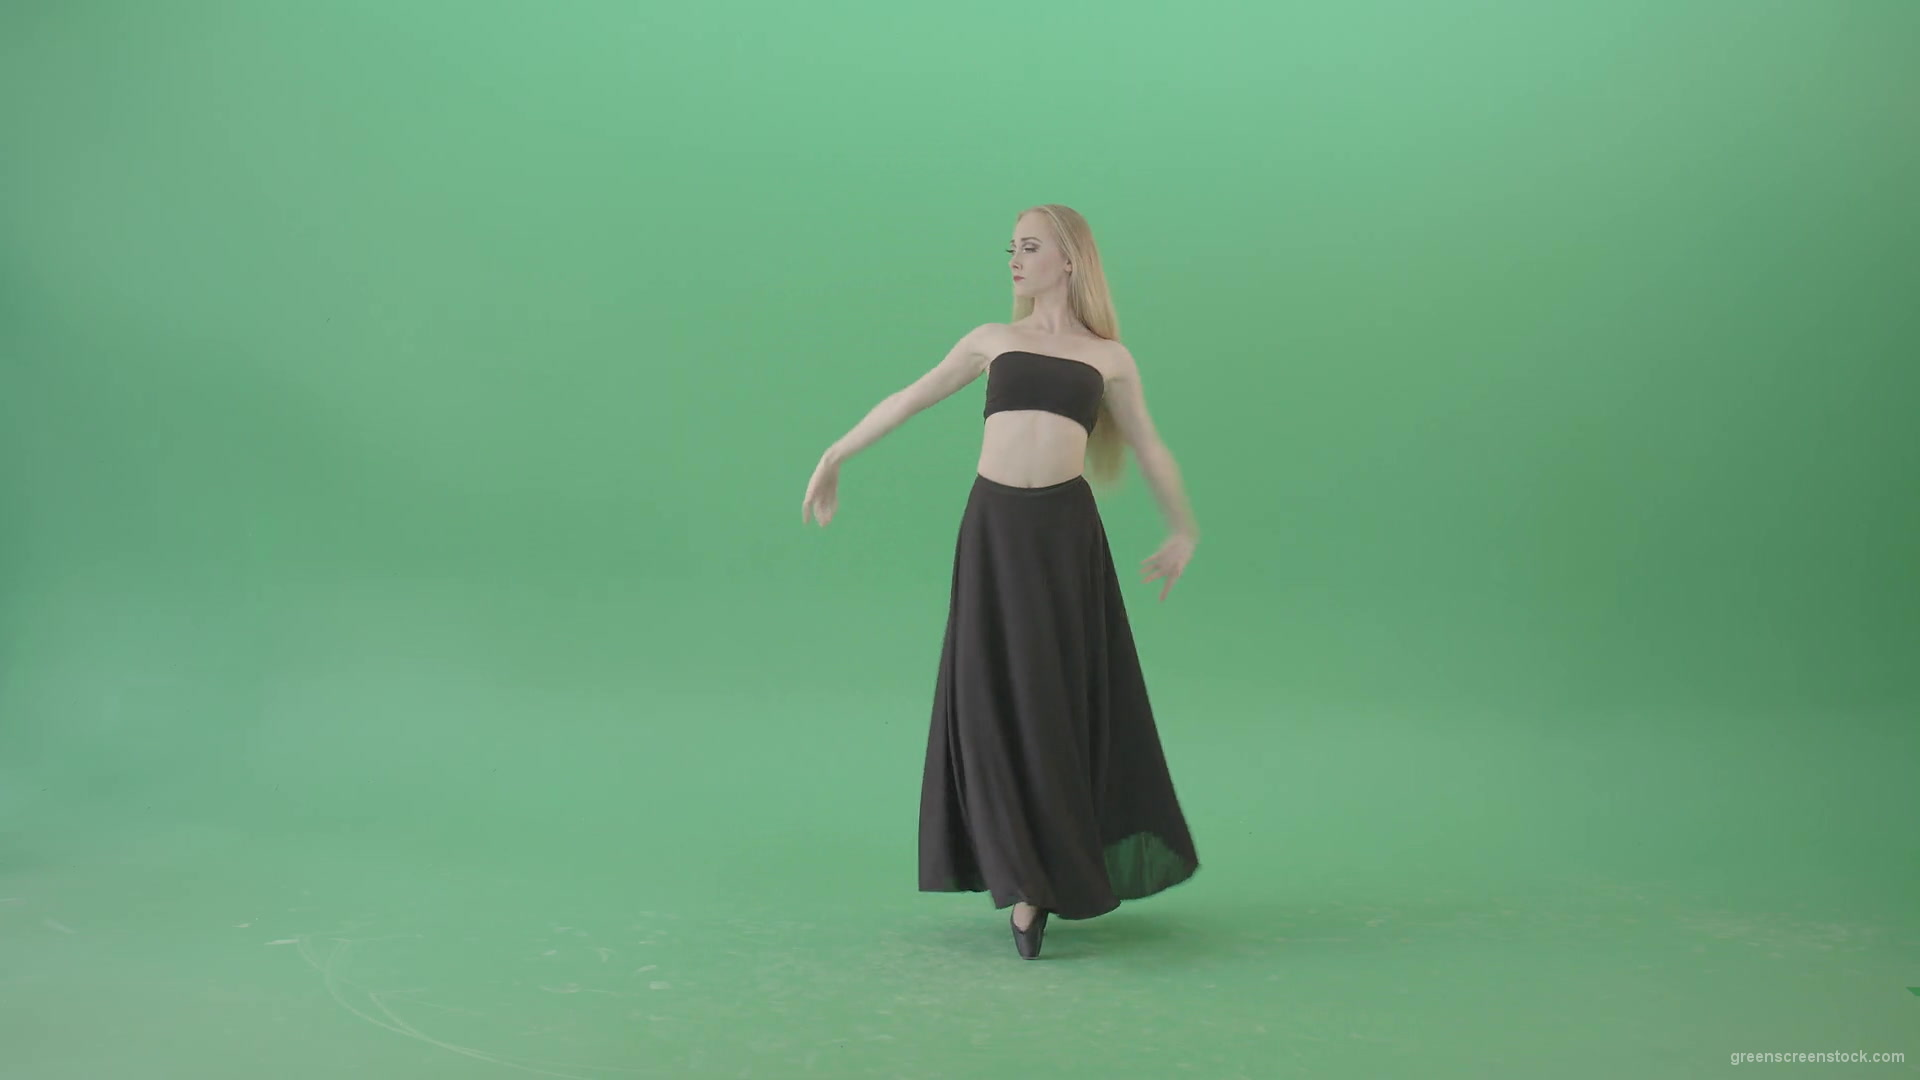 Dancing-in-the-shadow-spinning-on-the-green-screen-ballet-art-by-dancing-girl-4K-Video-Footage-1920_006 Green Screen Stock